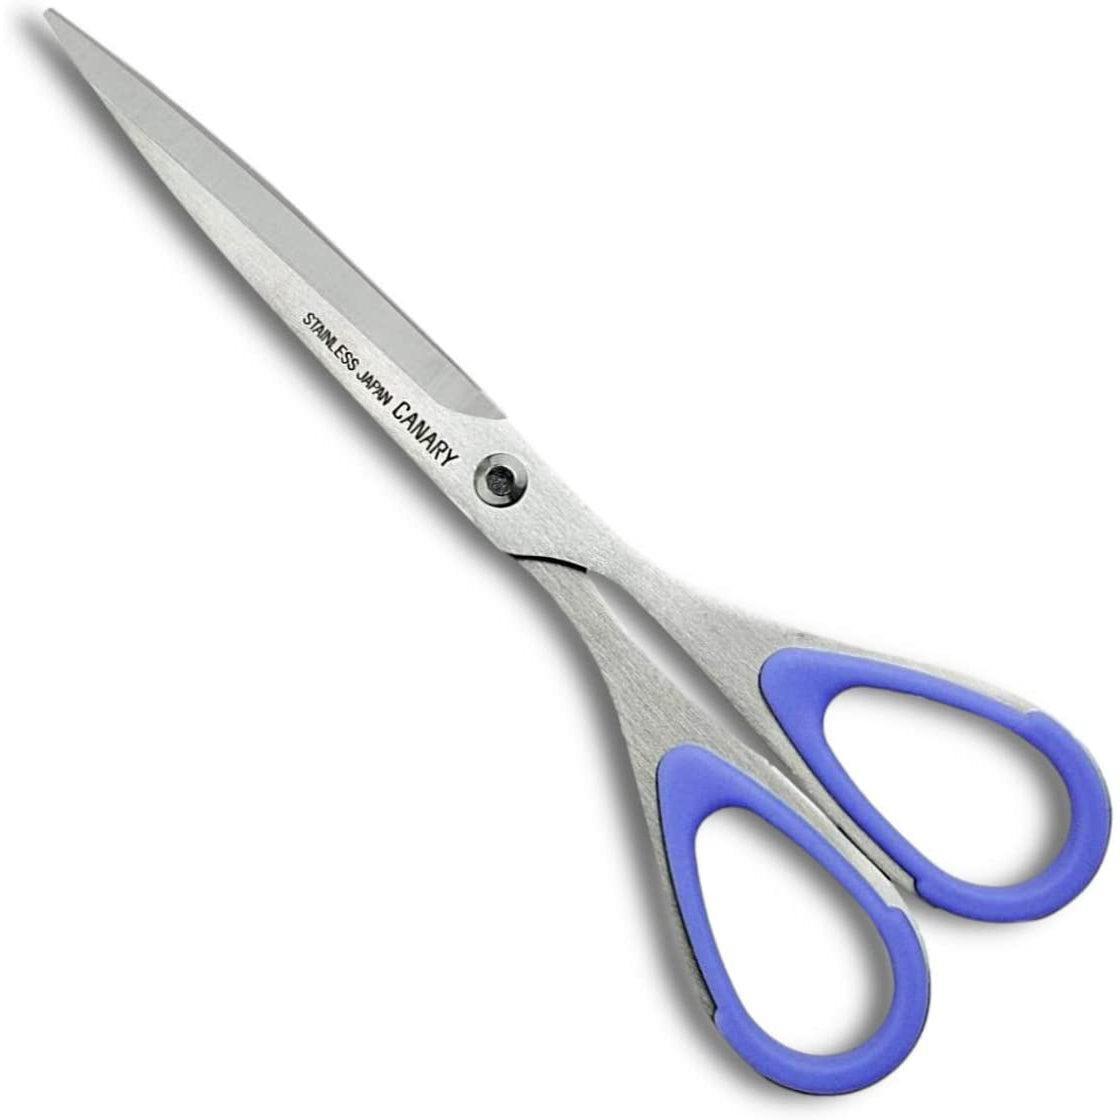 CANARY / MULTIPLE USE HEAVY DUTY SCISSORS (165mm) / AW-165H